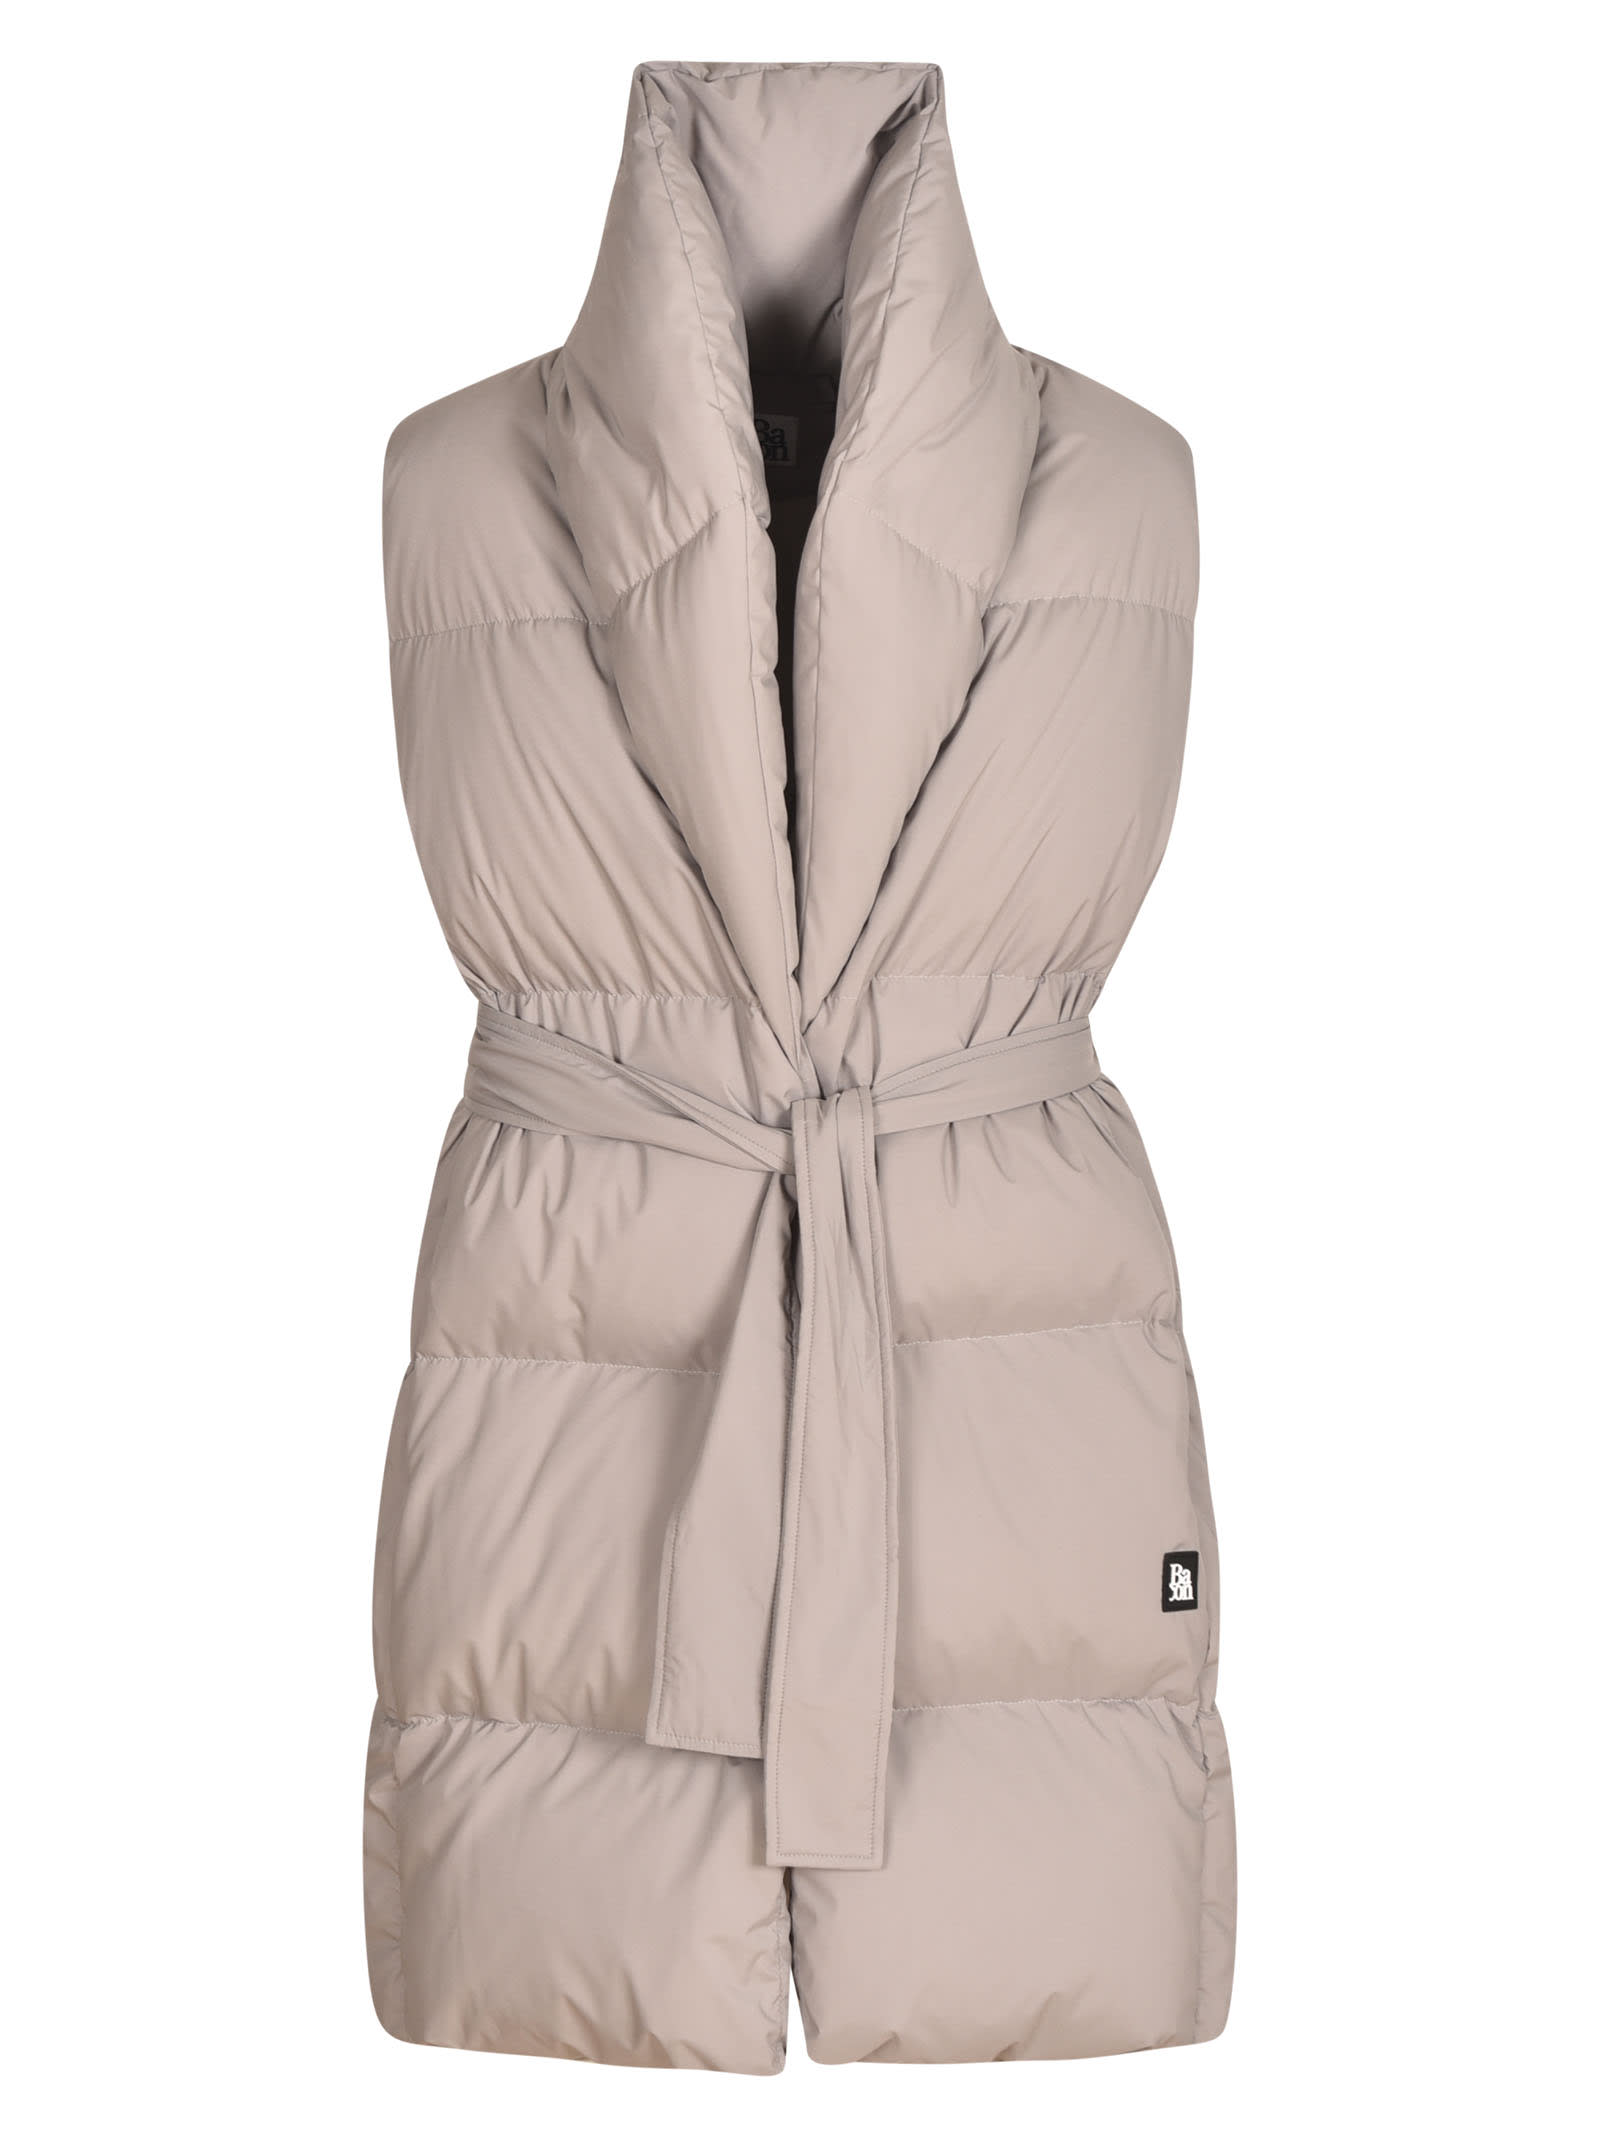 Bacon Belted Waist Gilet